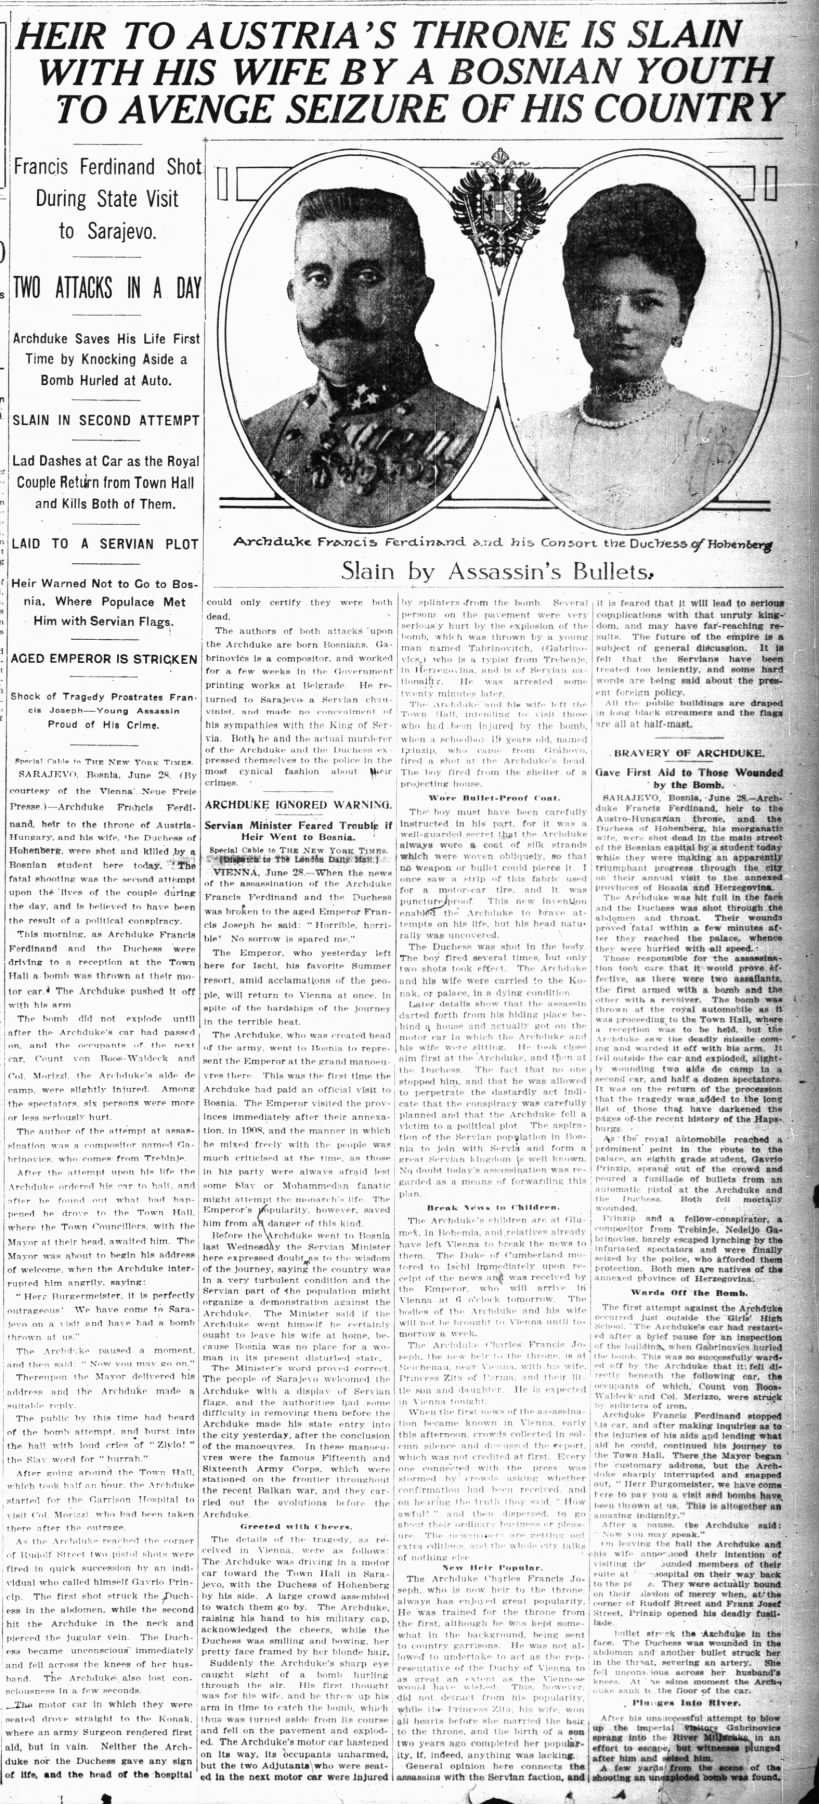 New York Times headlines about the shooting of Franz (Francis) Ferdinand and his wife in Sarajevo